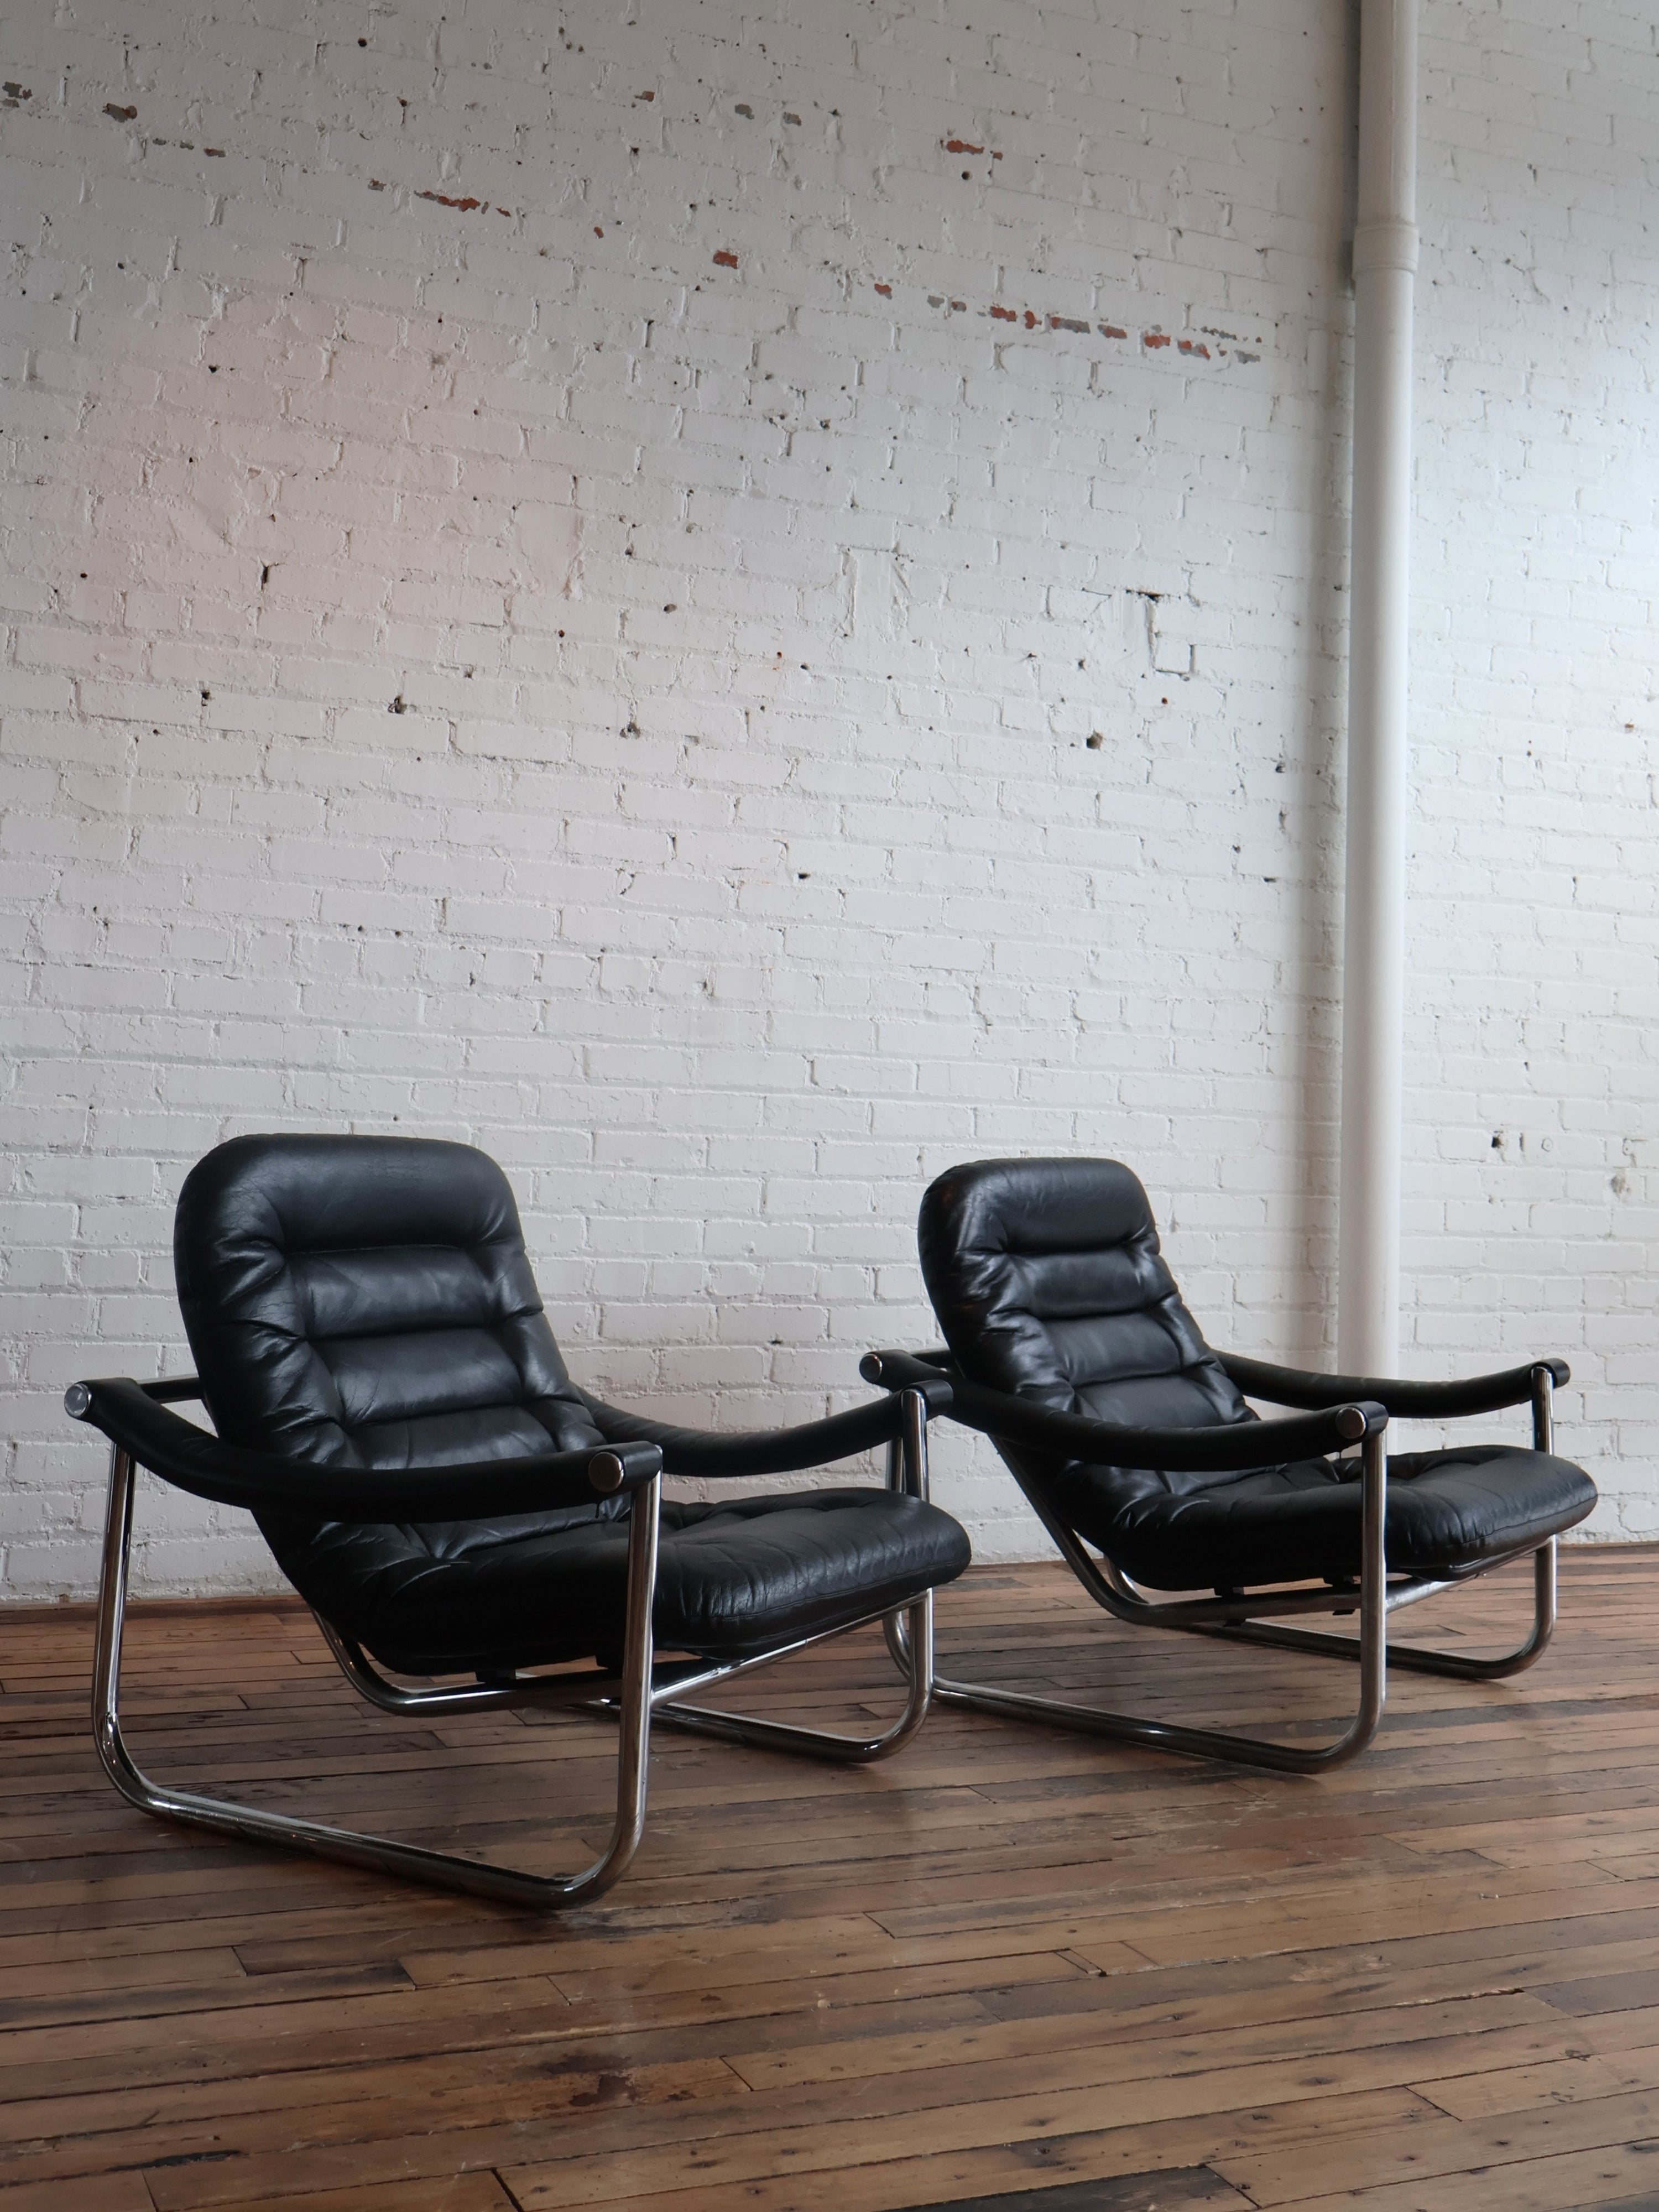 Vintage 1970s Italian Black Leather Chrome Chairs - Set of 2